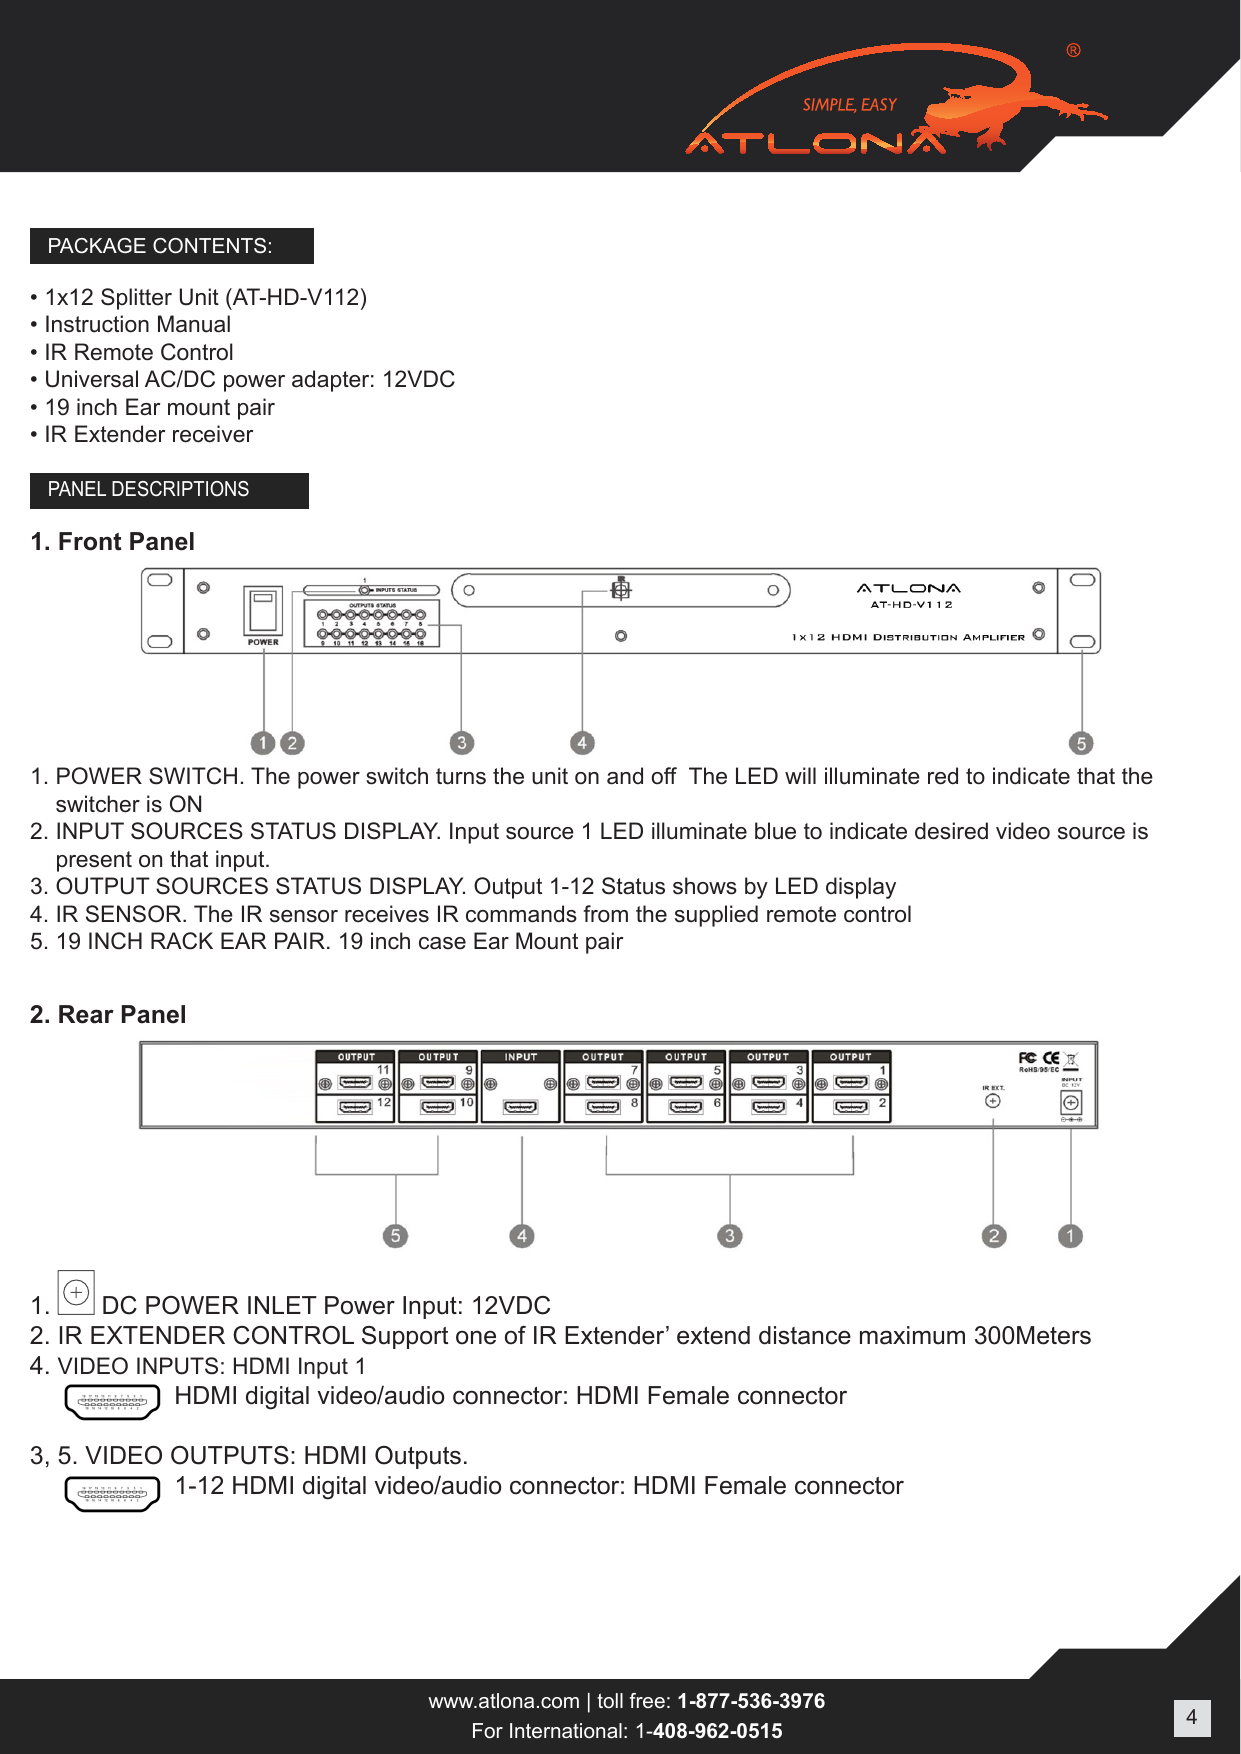 Page 4 of 9 - Atlona AT-HD-V112 User Manual  To The 2c5e098c-6c23-48f8-9cb7-b07608570673